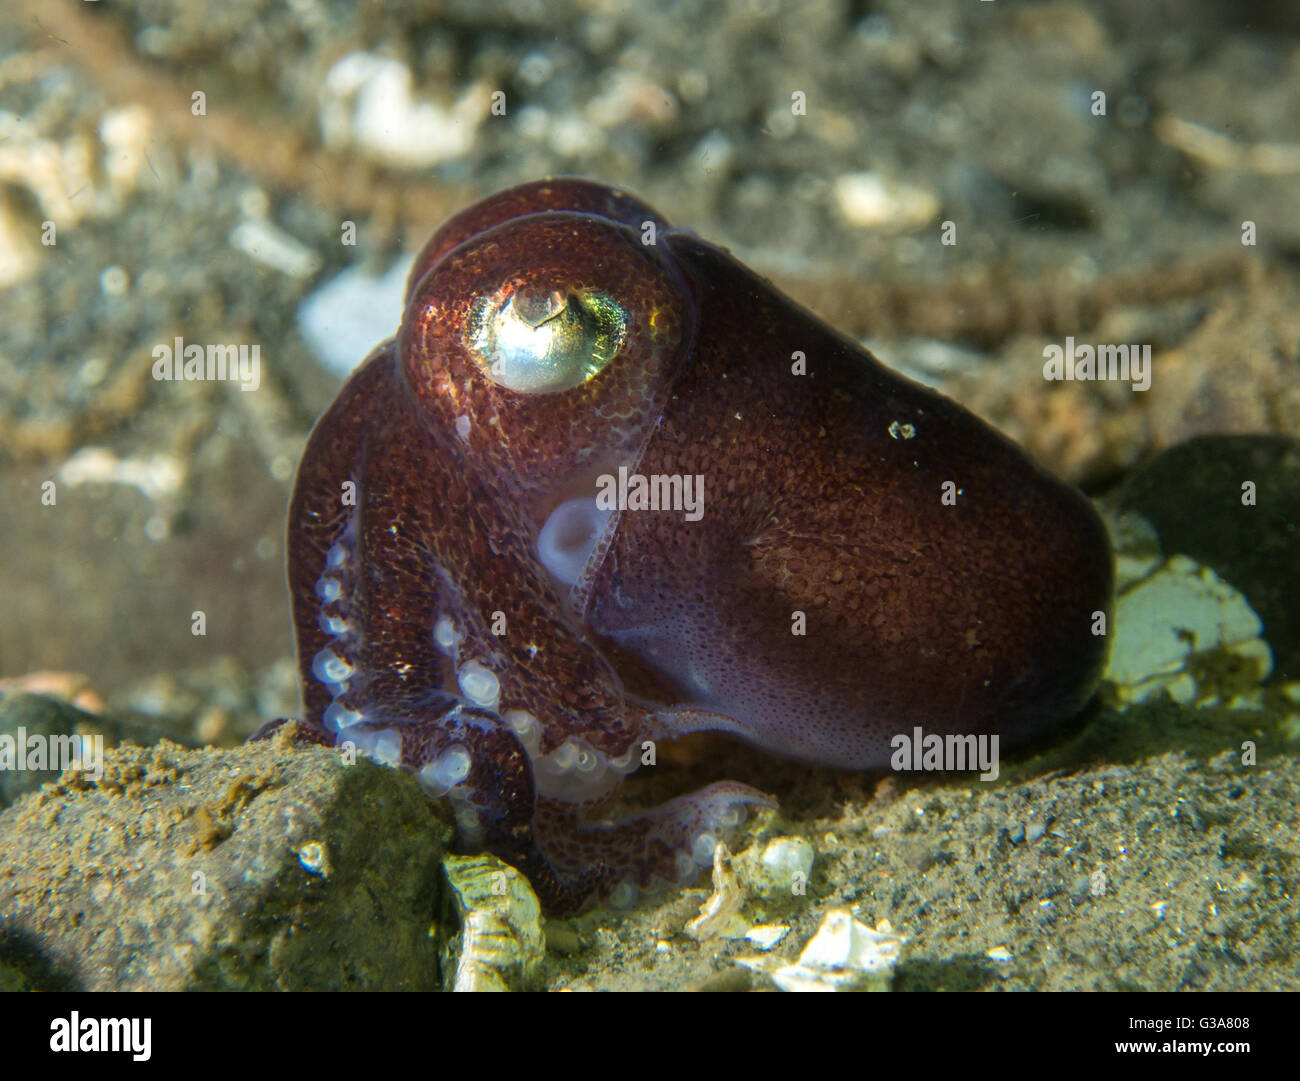 Stubby Tintenfisch, Rossia Pacifica in Seacrest Park, Bucht 3, Seattle. Stockfoto